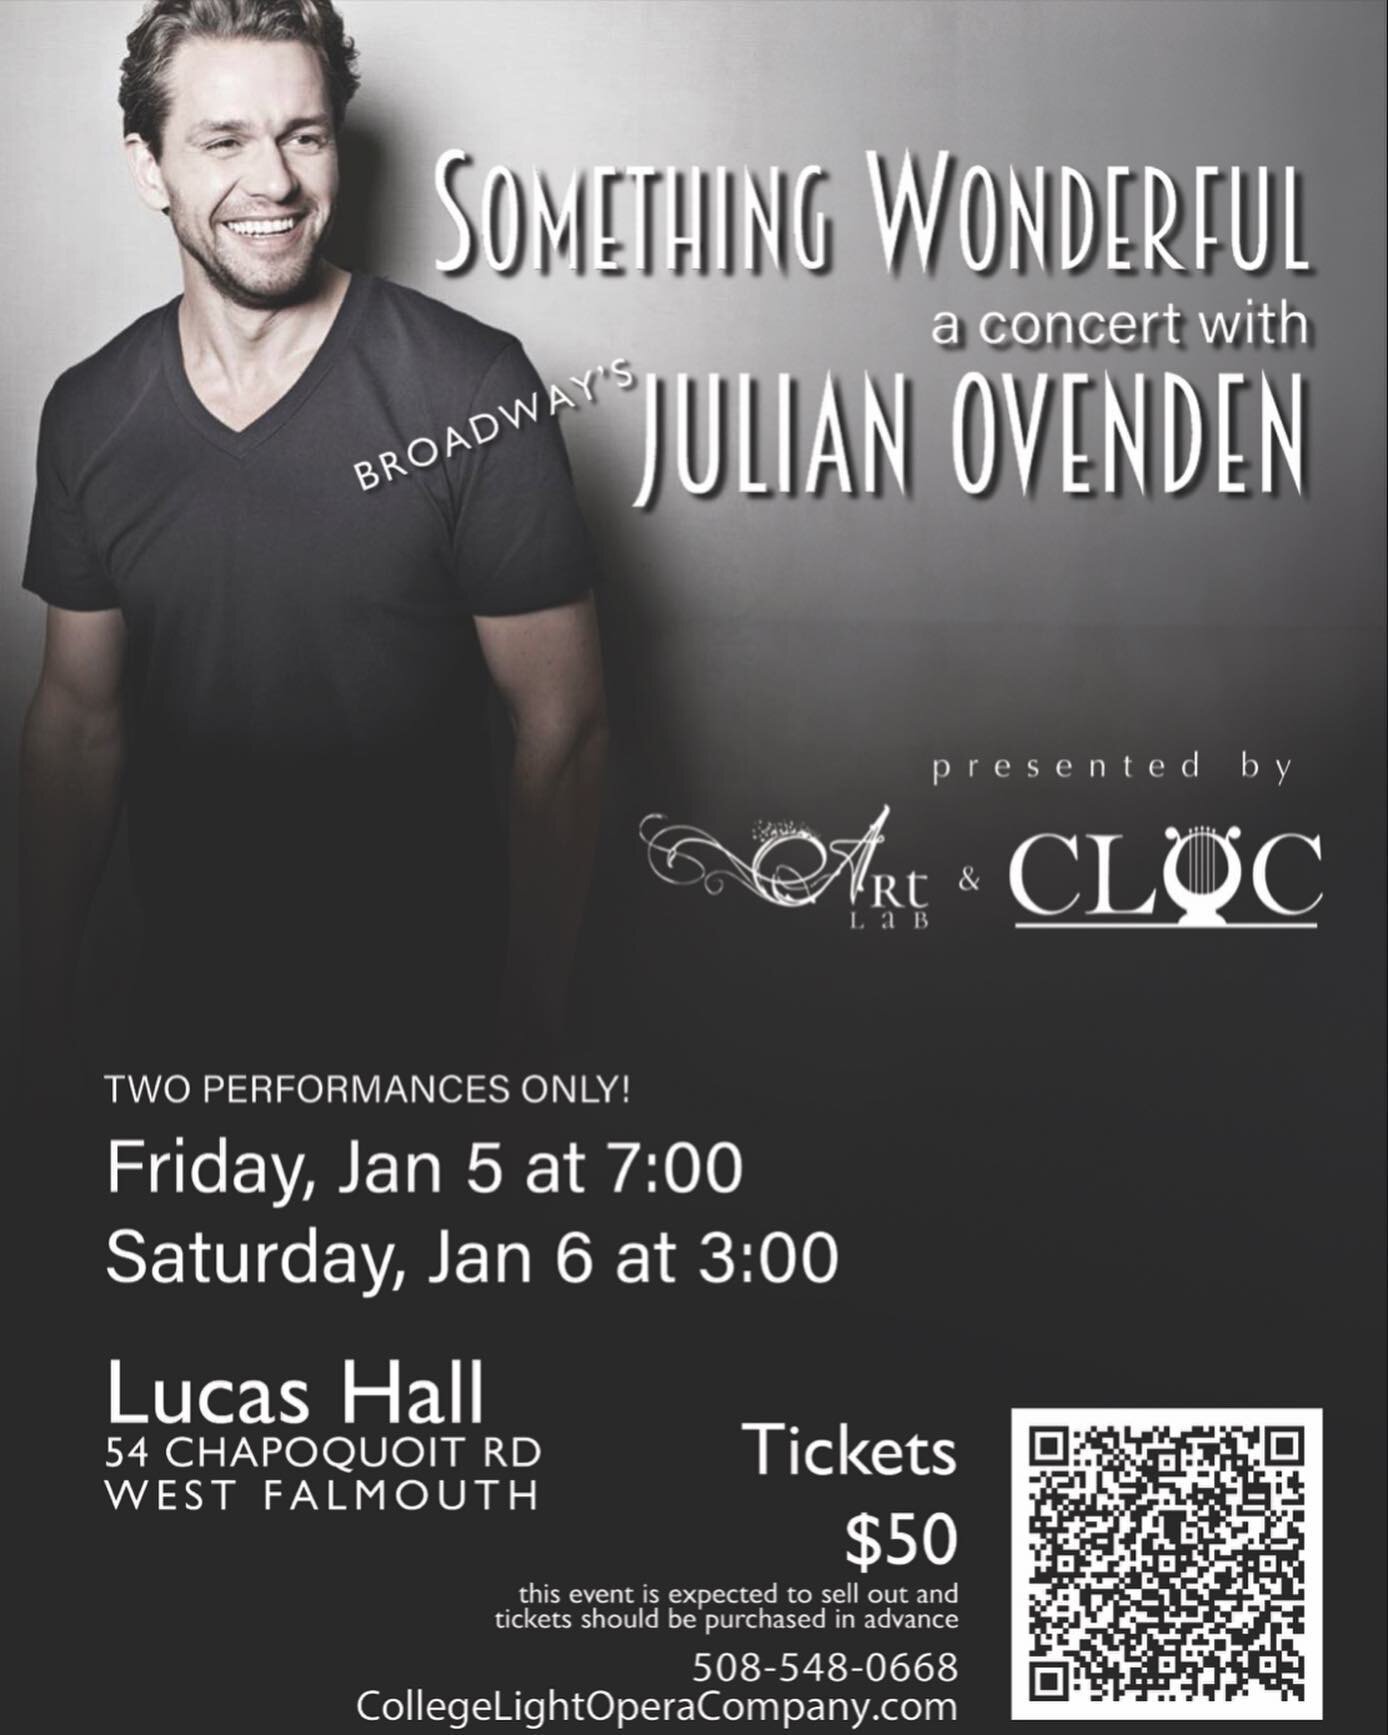 Something wonderful is coming to the cape! Seen in Bridgerton, Downton Abbey, and star of the West End; Julian Ovenden brings his musical talents to Lucas Hall this January. Get your tickets through the link in our bio!